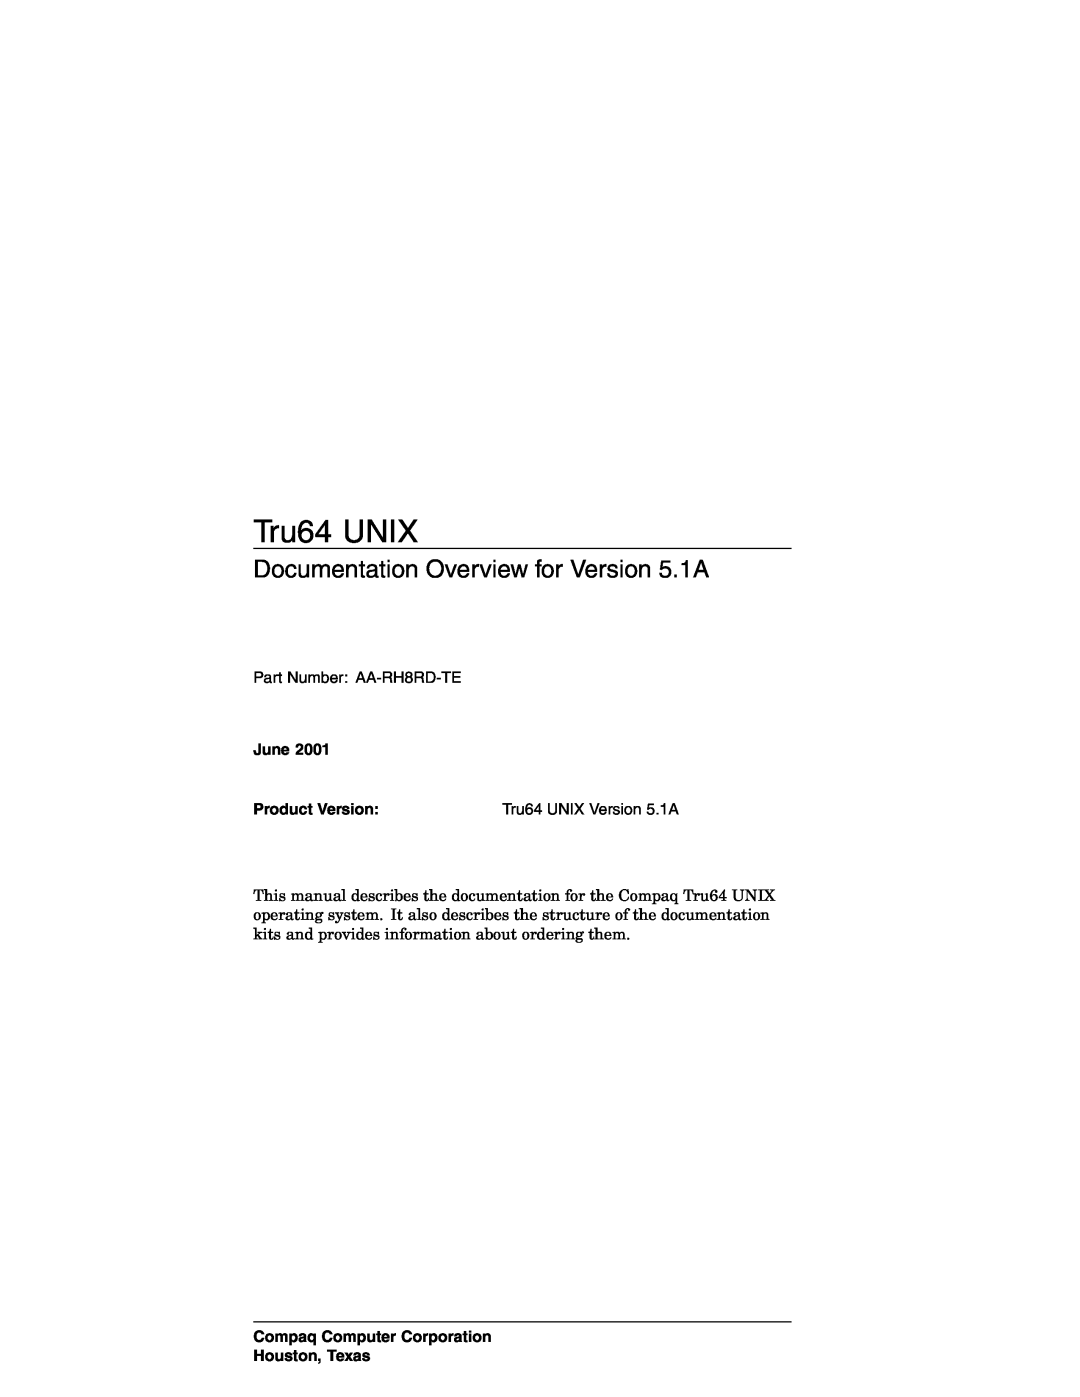 Compaq manual Tru64 UNIX, Documentation Overview for Version 5.1A, Part Number AA-RH8RD-TE, June, Product Version 